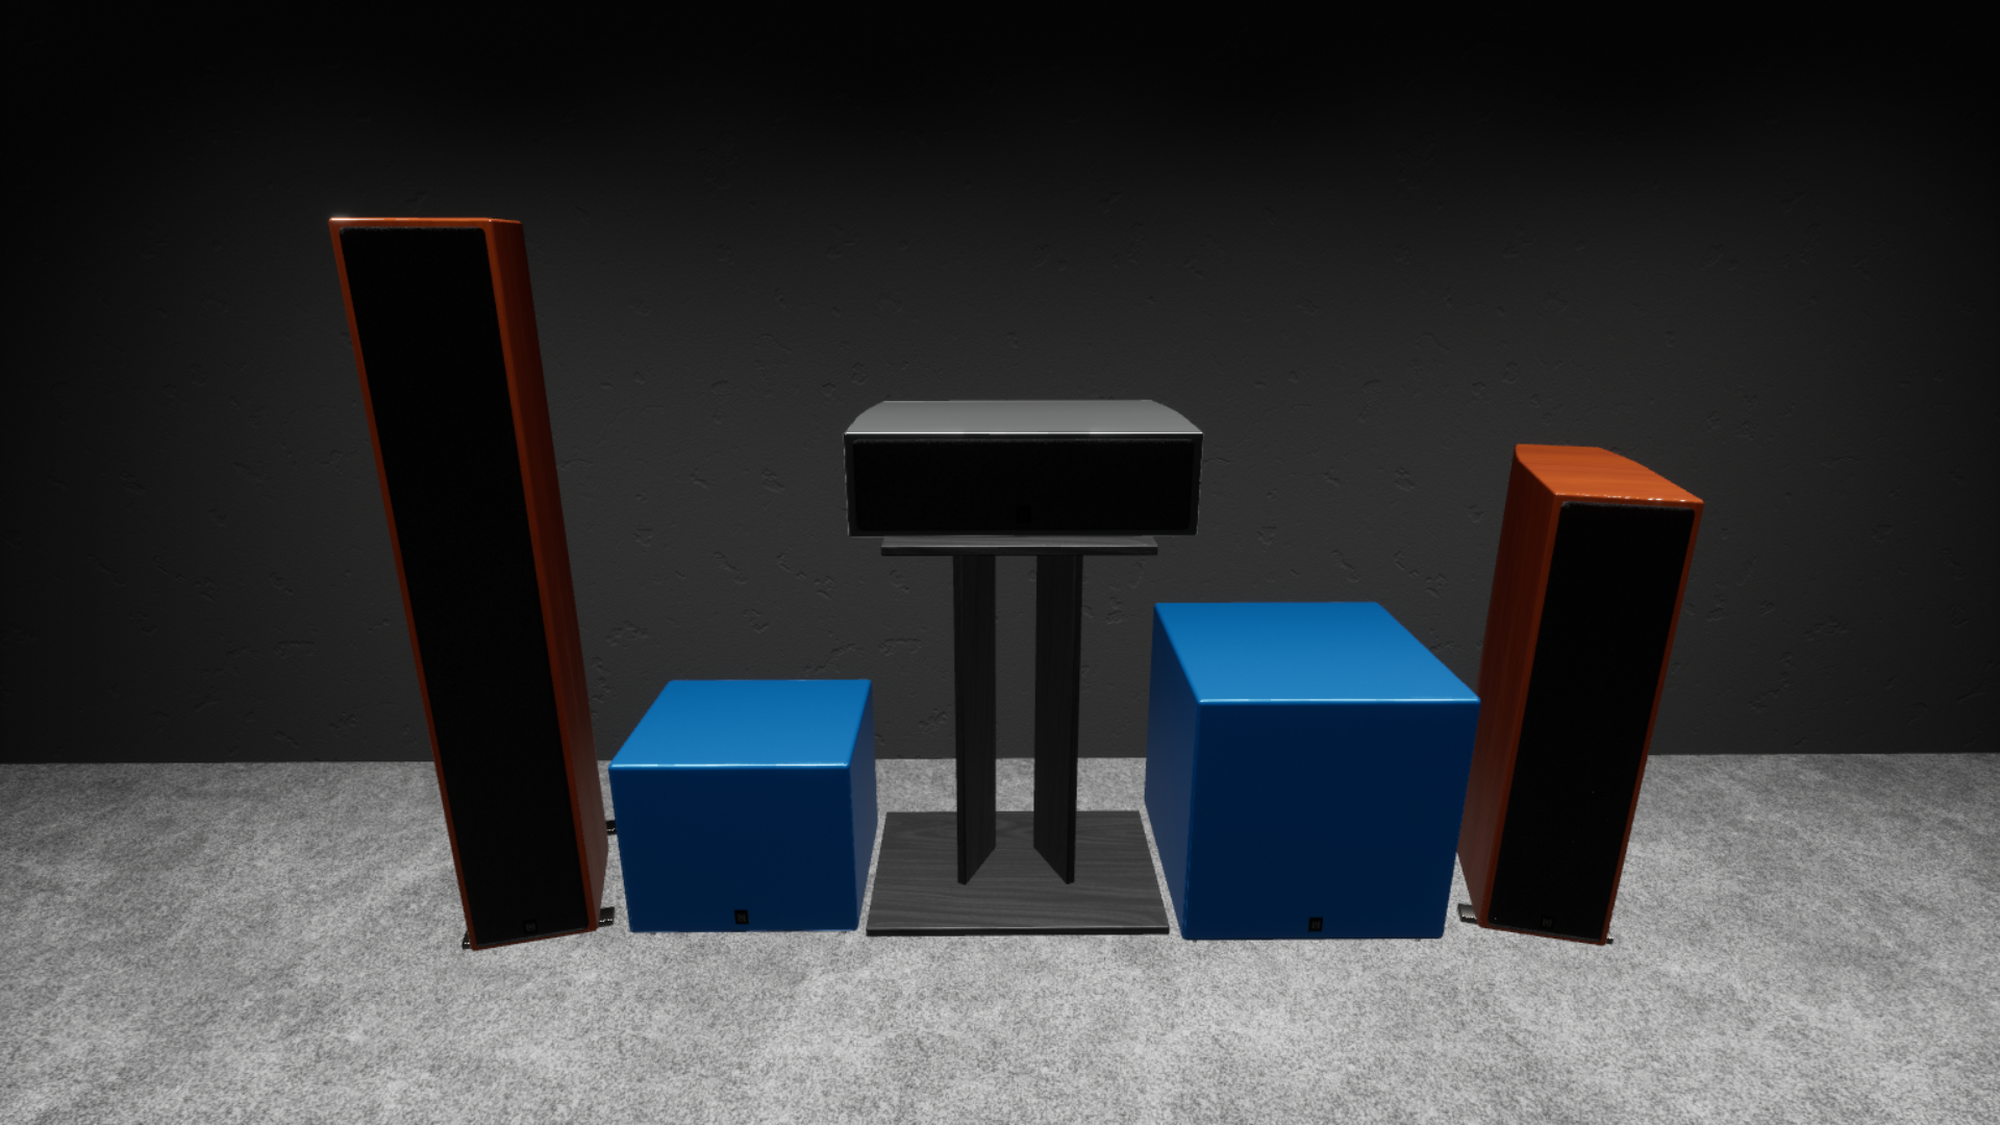 resizeable generic speakers and subs